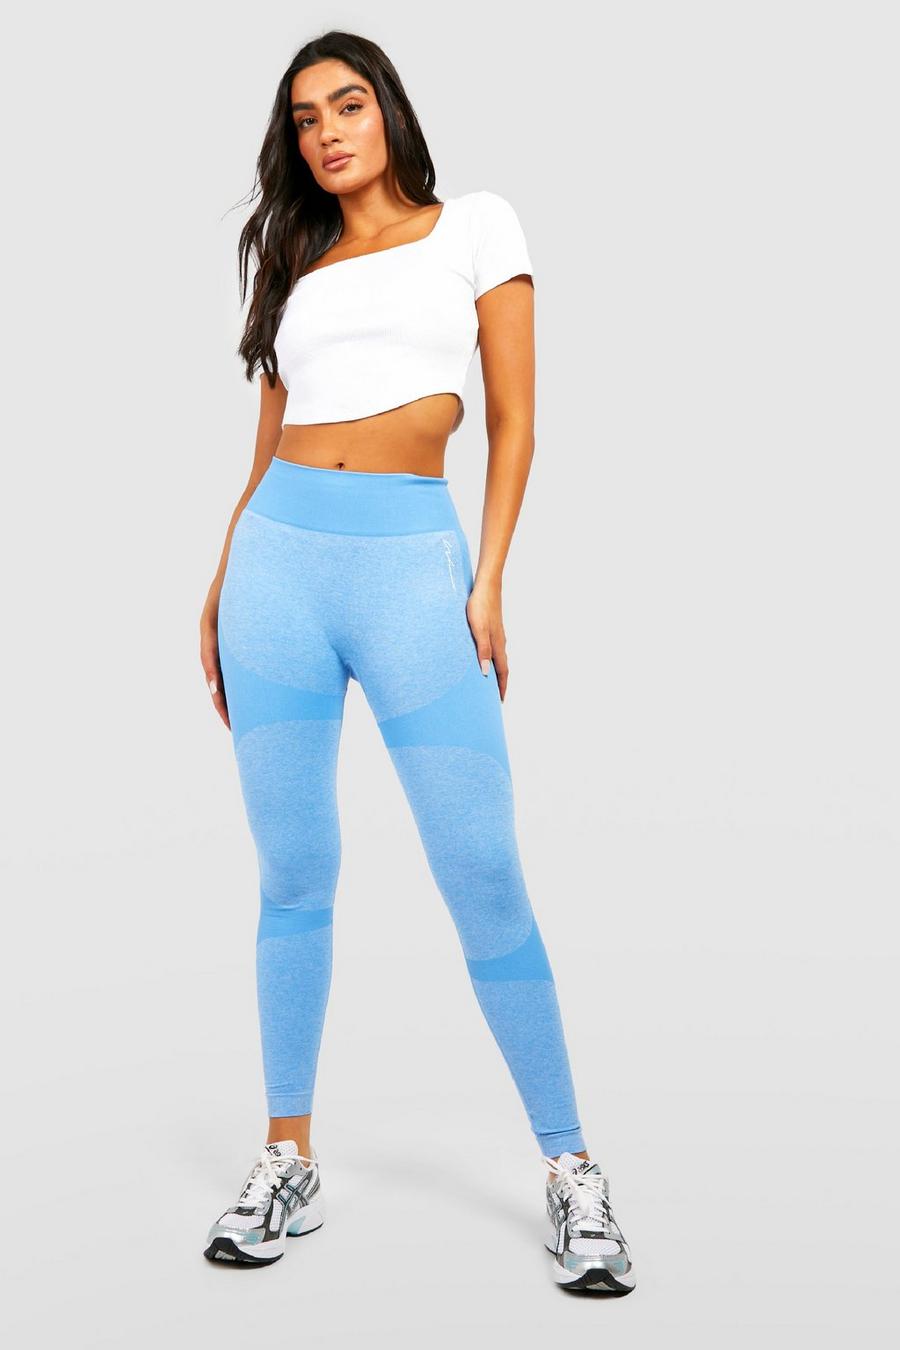 Sky blue Fit Seamless Contrast Workout Leggings image number 1